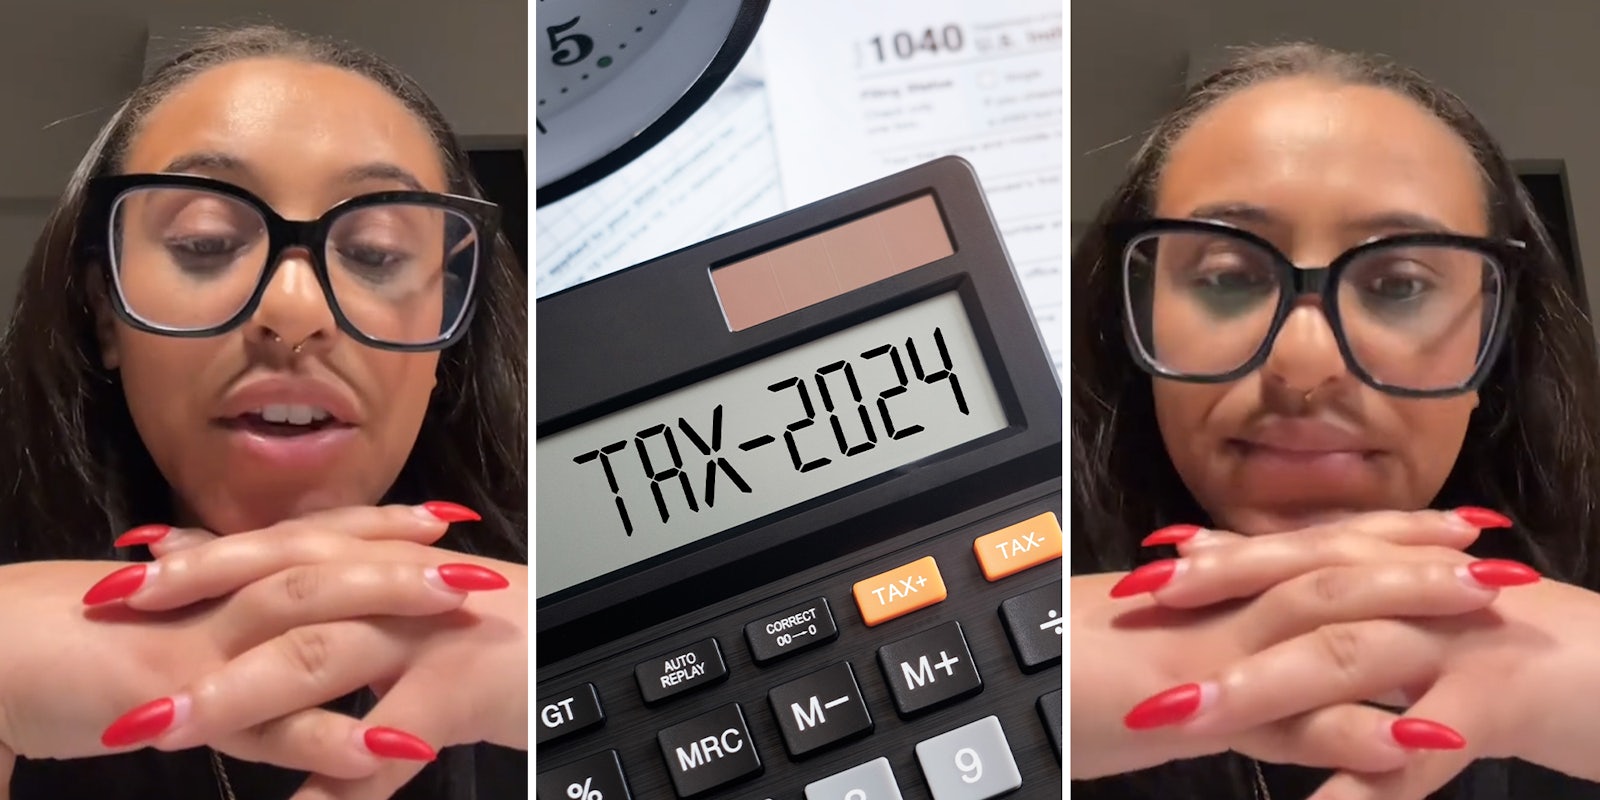 Black woman calls out white people who don’t pay taxes out of ‘moral’ objection